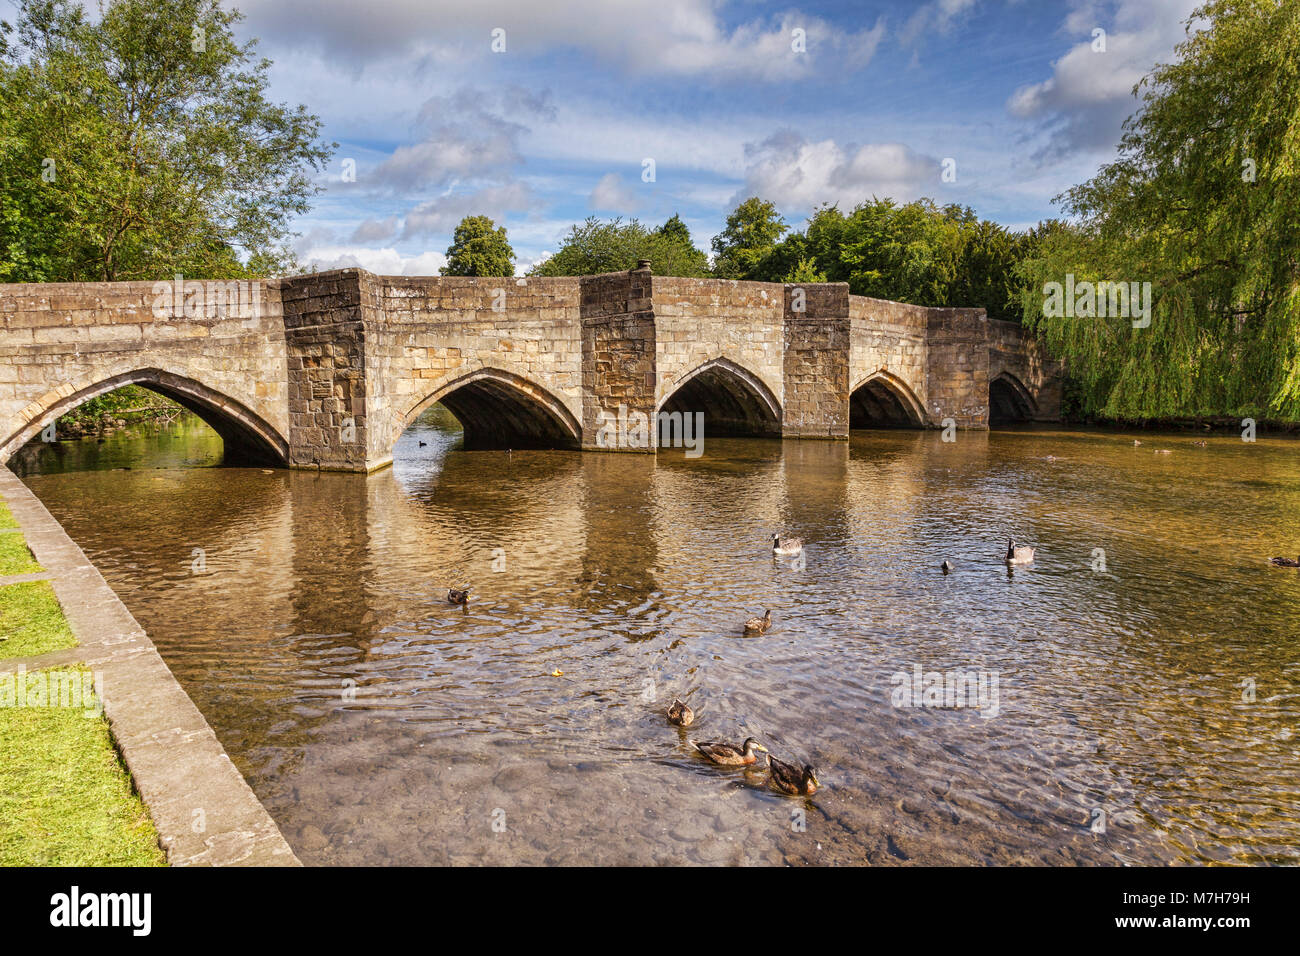 The 13th century, five arched bridge on the River Wye at Bakewell, Derbyshire, England Stock Photo